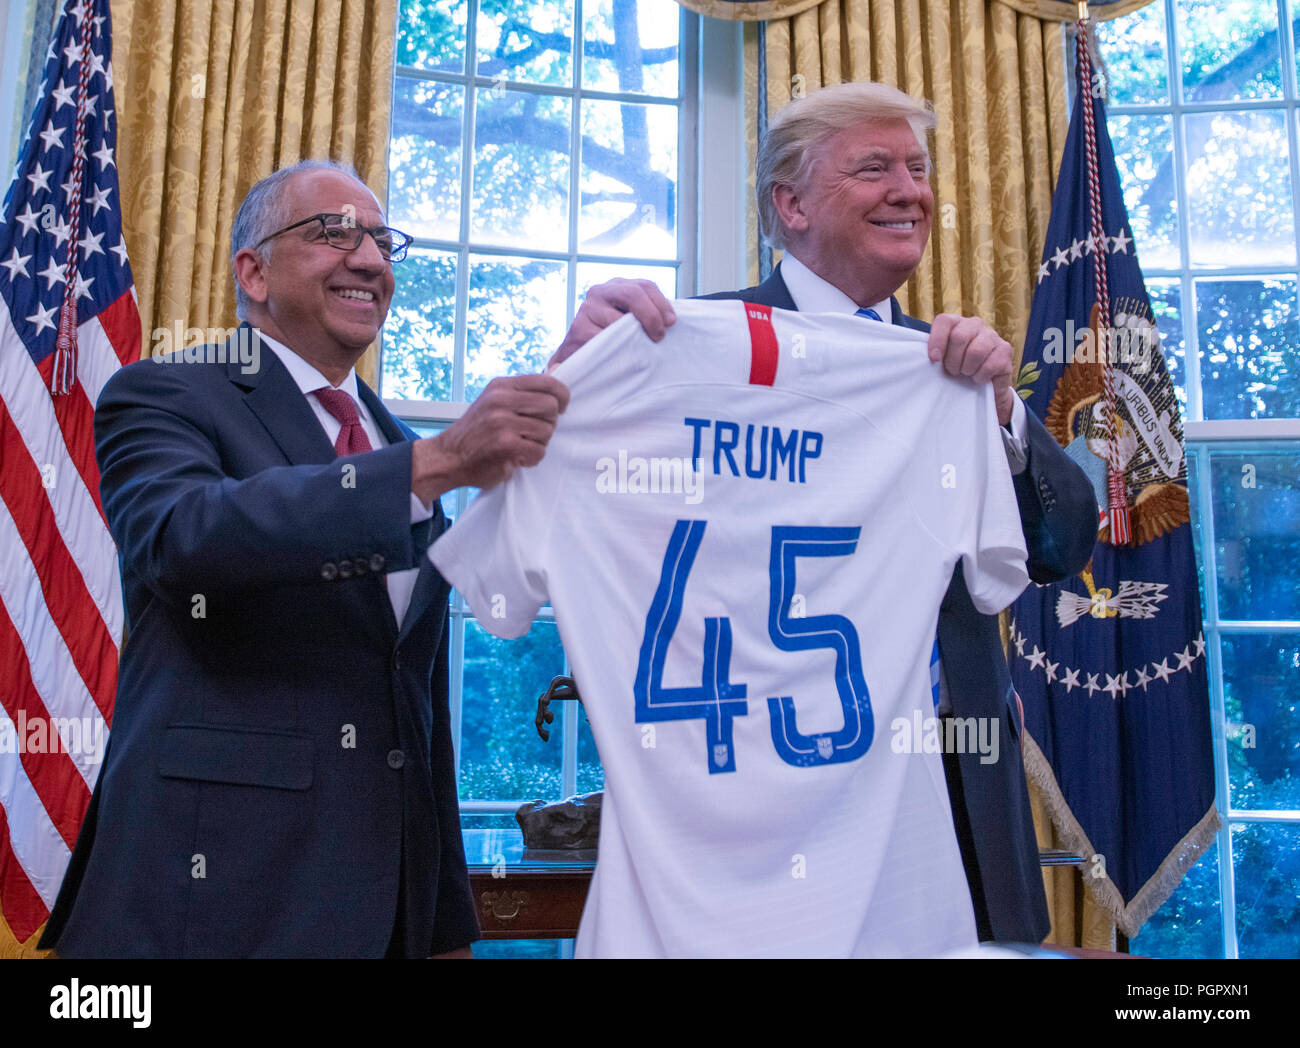 United States President Donald J. Trump and US Soccer President Carlos Cordeiro hold a soccer jersey in the Oval Office of the White House in Washington, DC on Tuesday, August 28, 2018. FIFA describes itself as an international governing body of association football, futsal, and beach soccer. Credit: Ron Sachs/CNP /MediaPunch Stock Photo